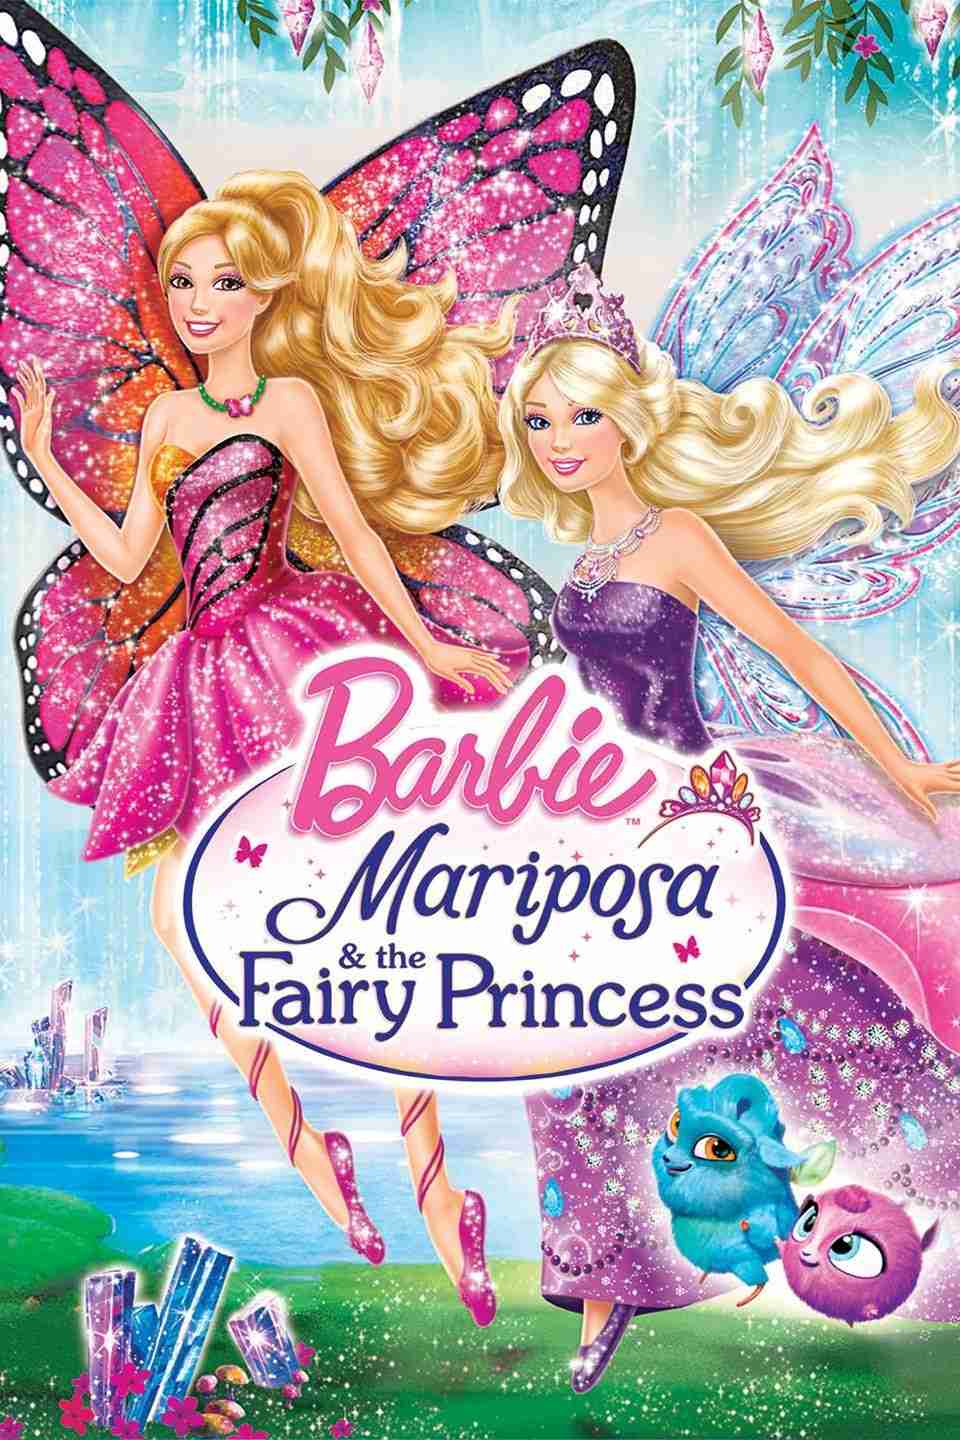 List of All Barbie Movies Online Barbie Mariposa and the Fairy Princess